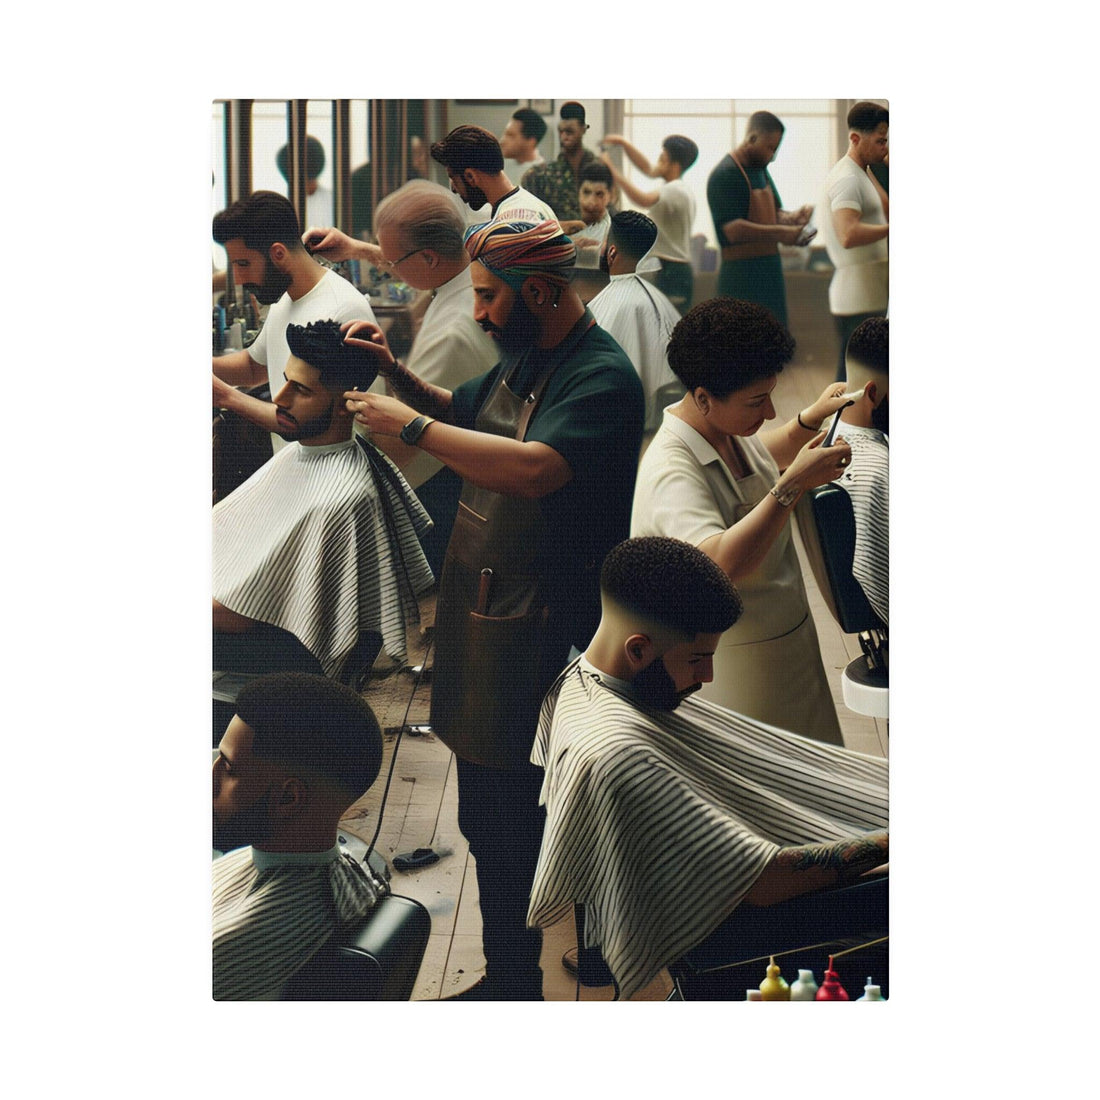 "Barber Shop Chronicles: Timeless Canvas Wall Art" - The Alice Gallery